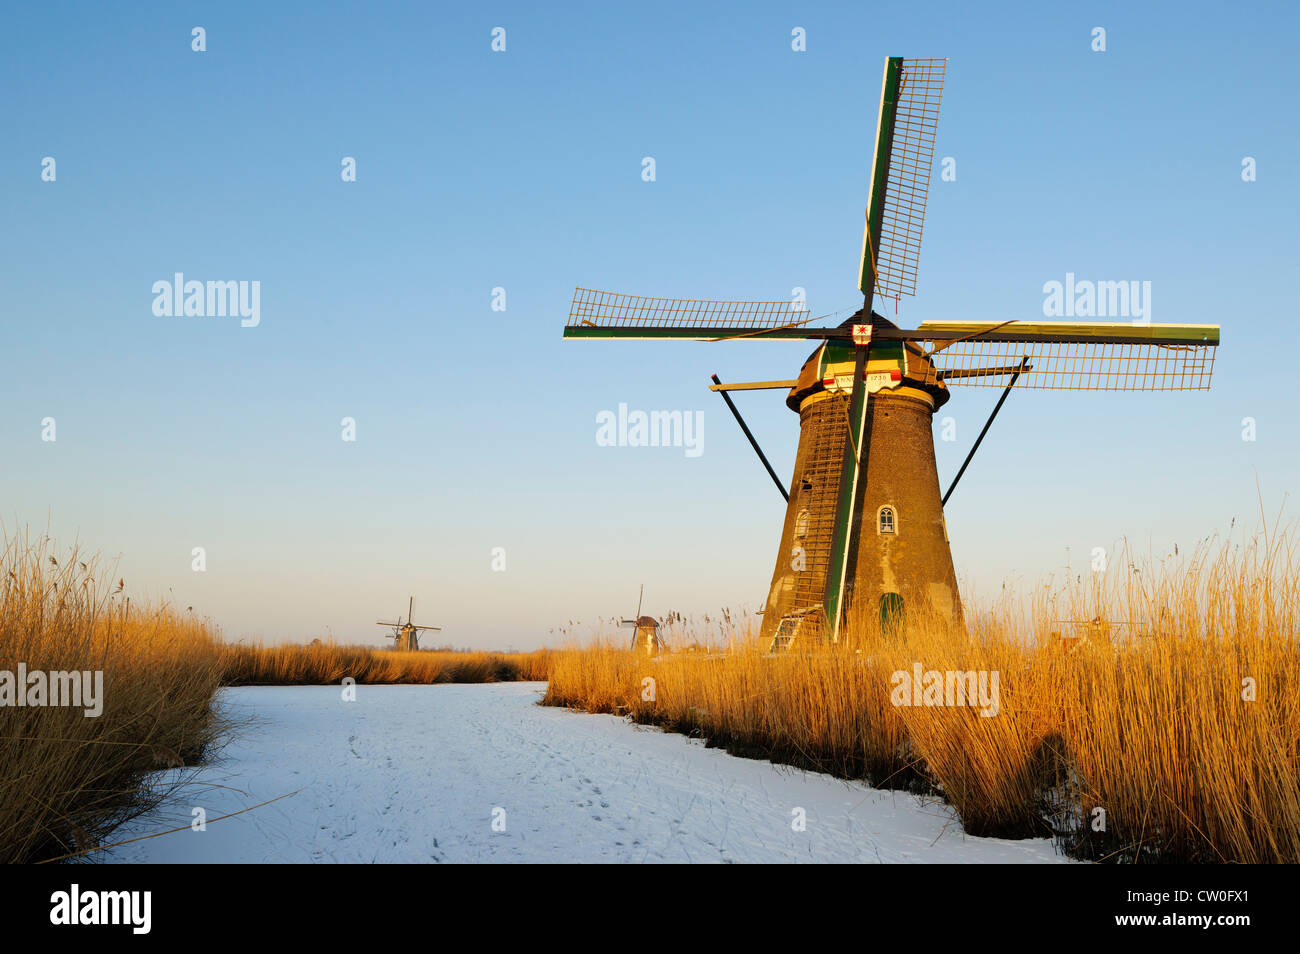 Windmill by river in rural landscape Stock Photo